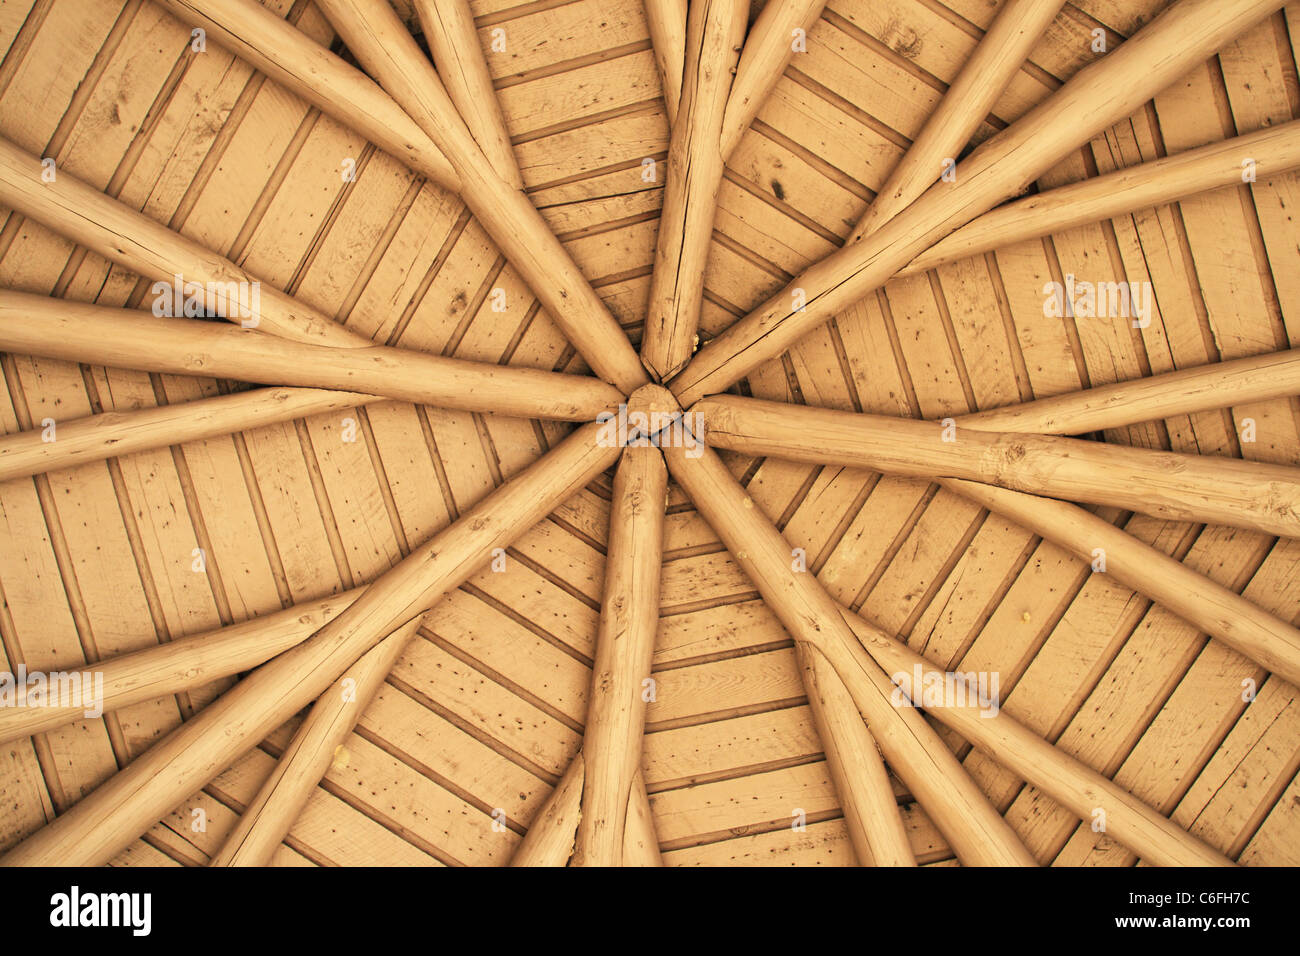 view up at ceiling of outdoor gazebo showing radial roof beams Stock Photo